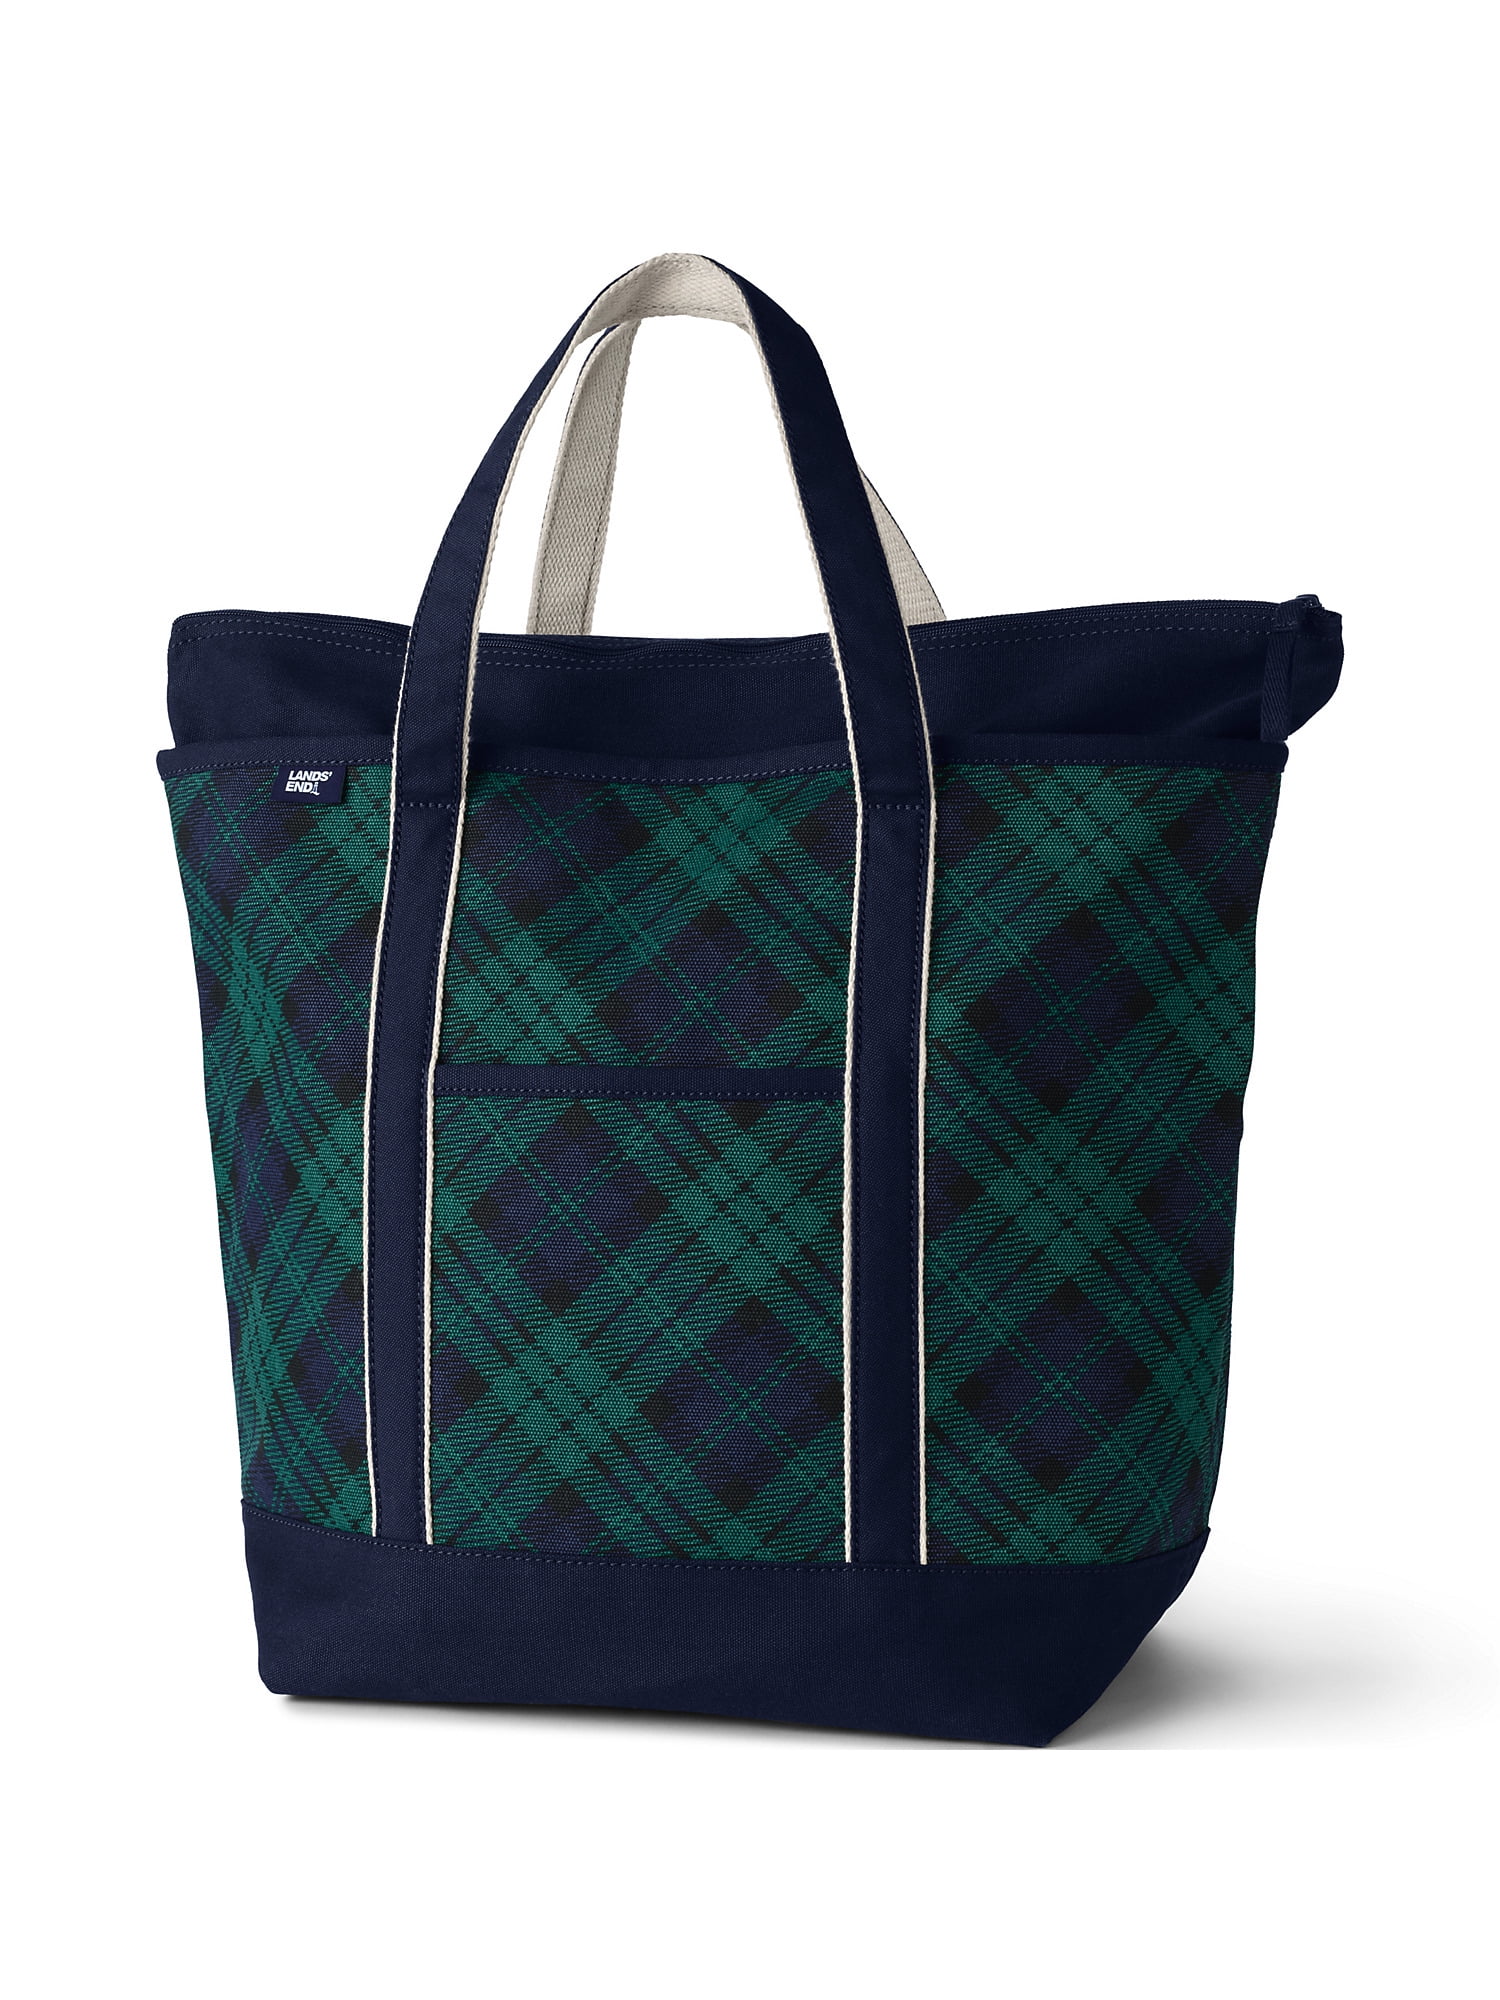 Classic Extra Large Two Tone Zip Top Canvas Tote Bag Rich Redtrue Navy18,  $52, Lands' End